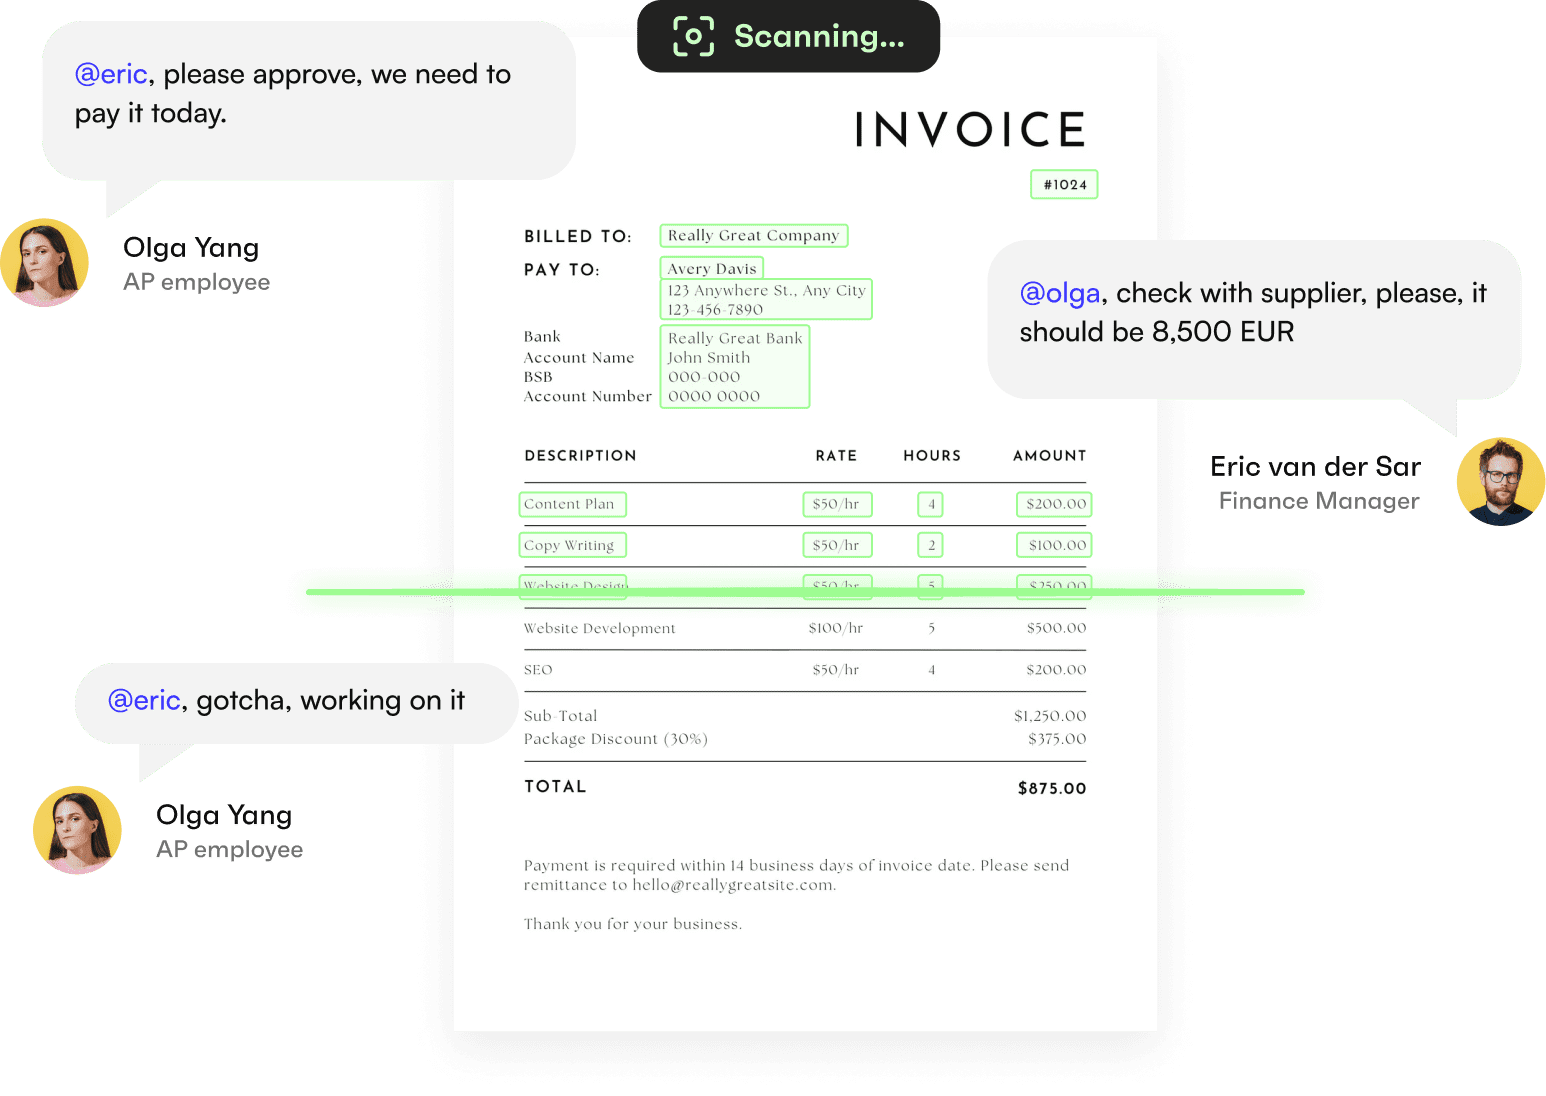 Invoice review and suggestions